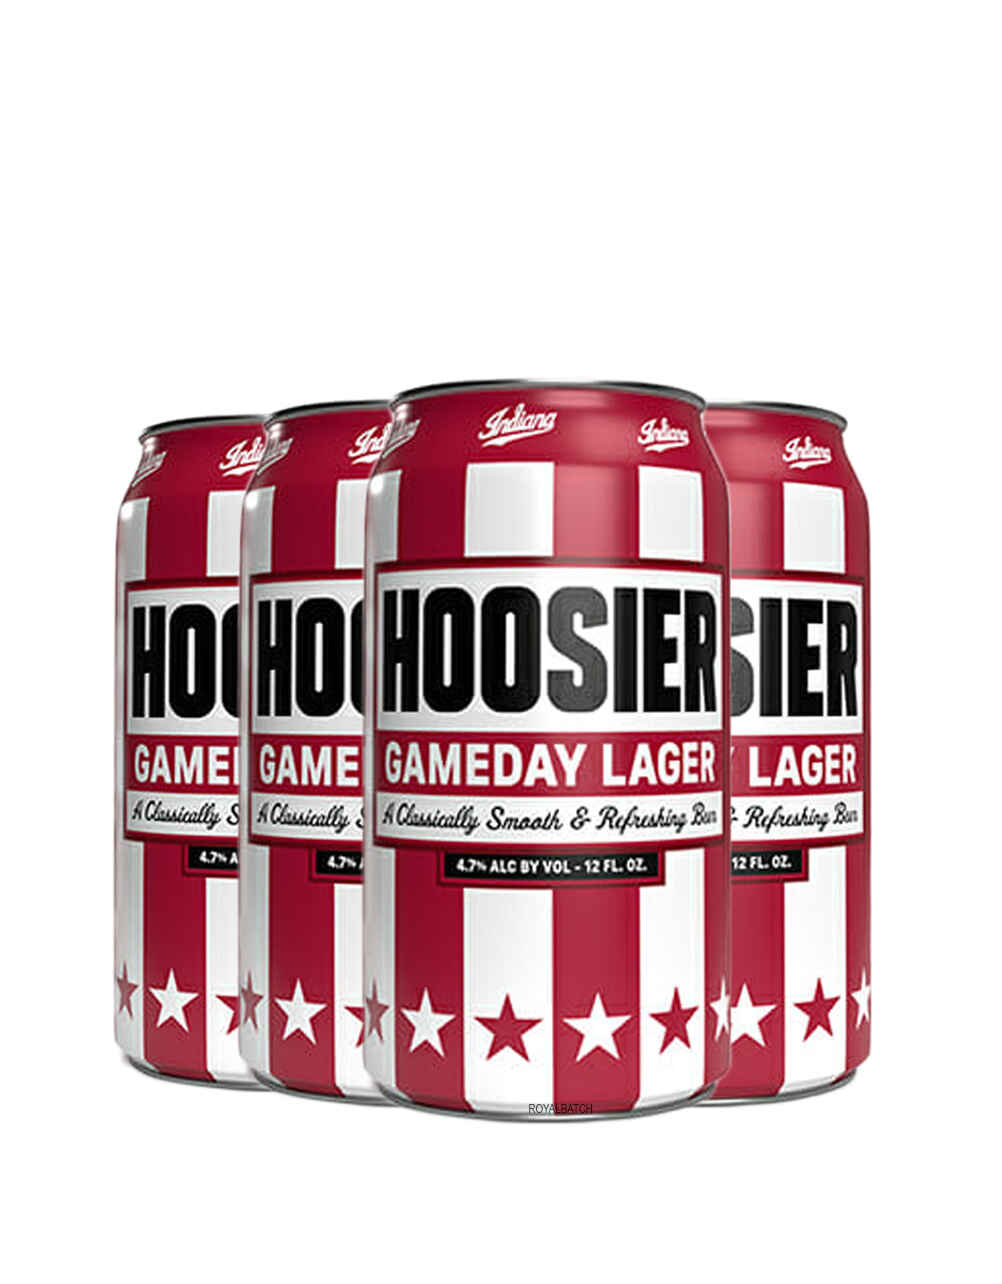 Indiana Hoosier Gameday Lager Cocktail 4 Pack